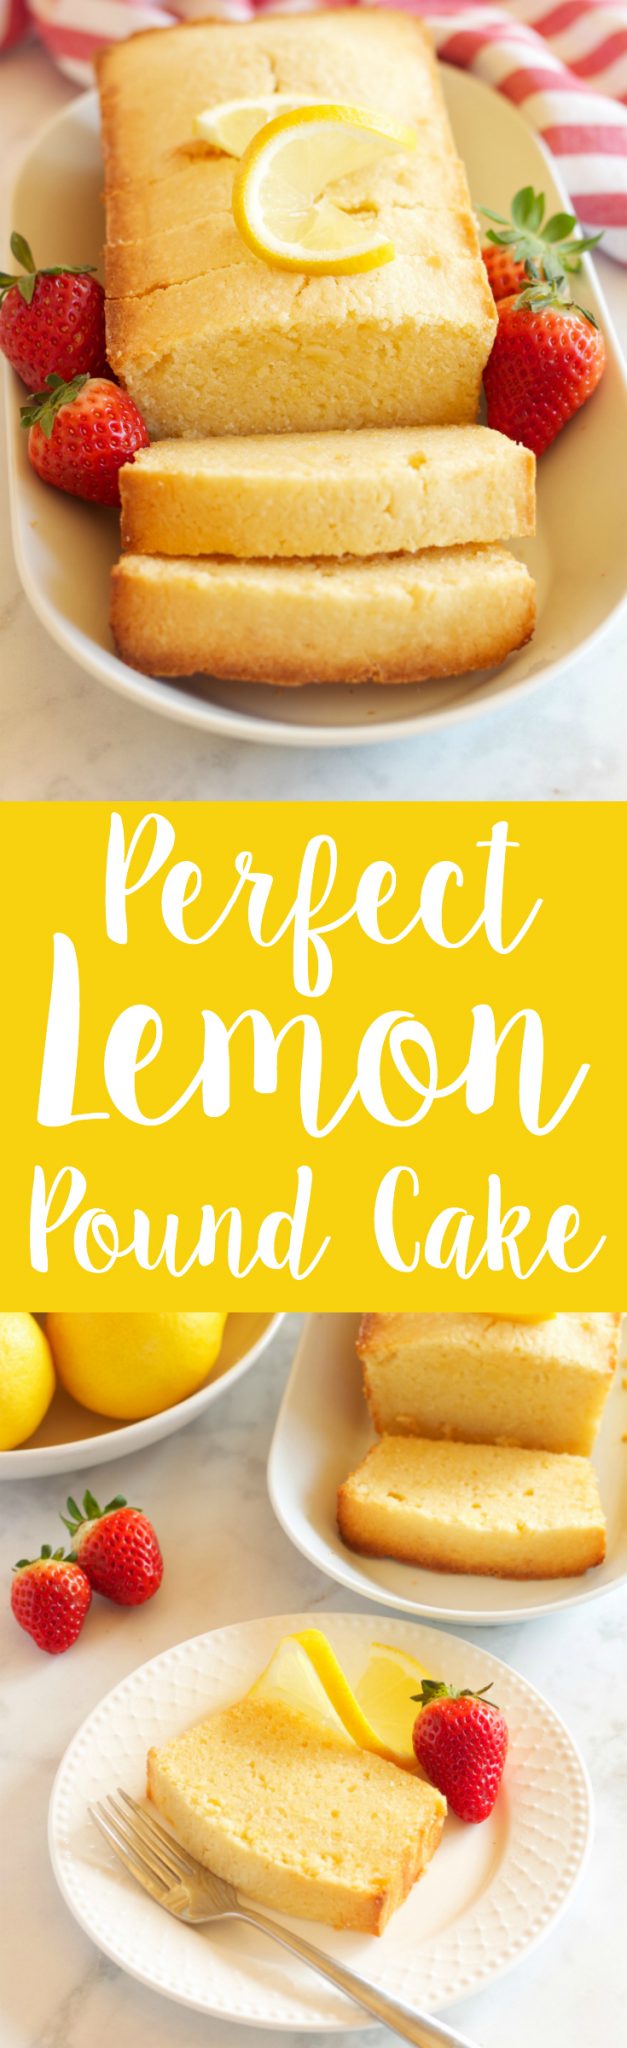 This Perfect Lemon Pound Cake is the ultimate no-fail Spring dessert recipe that's moist and tender and made with fresh lemons! Recipe from thebusybaker.ca! via @busybakerblog